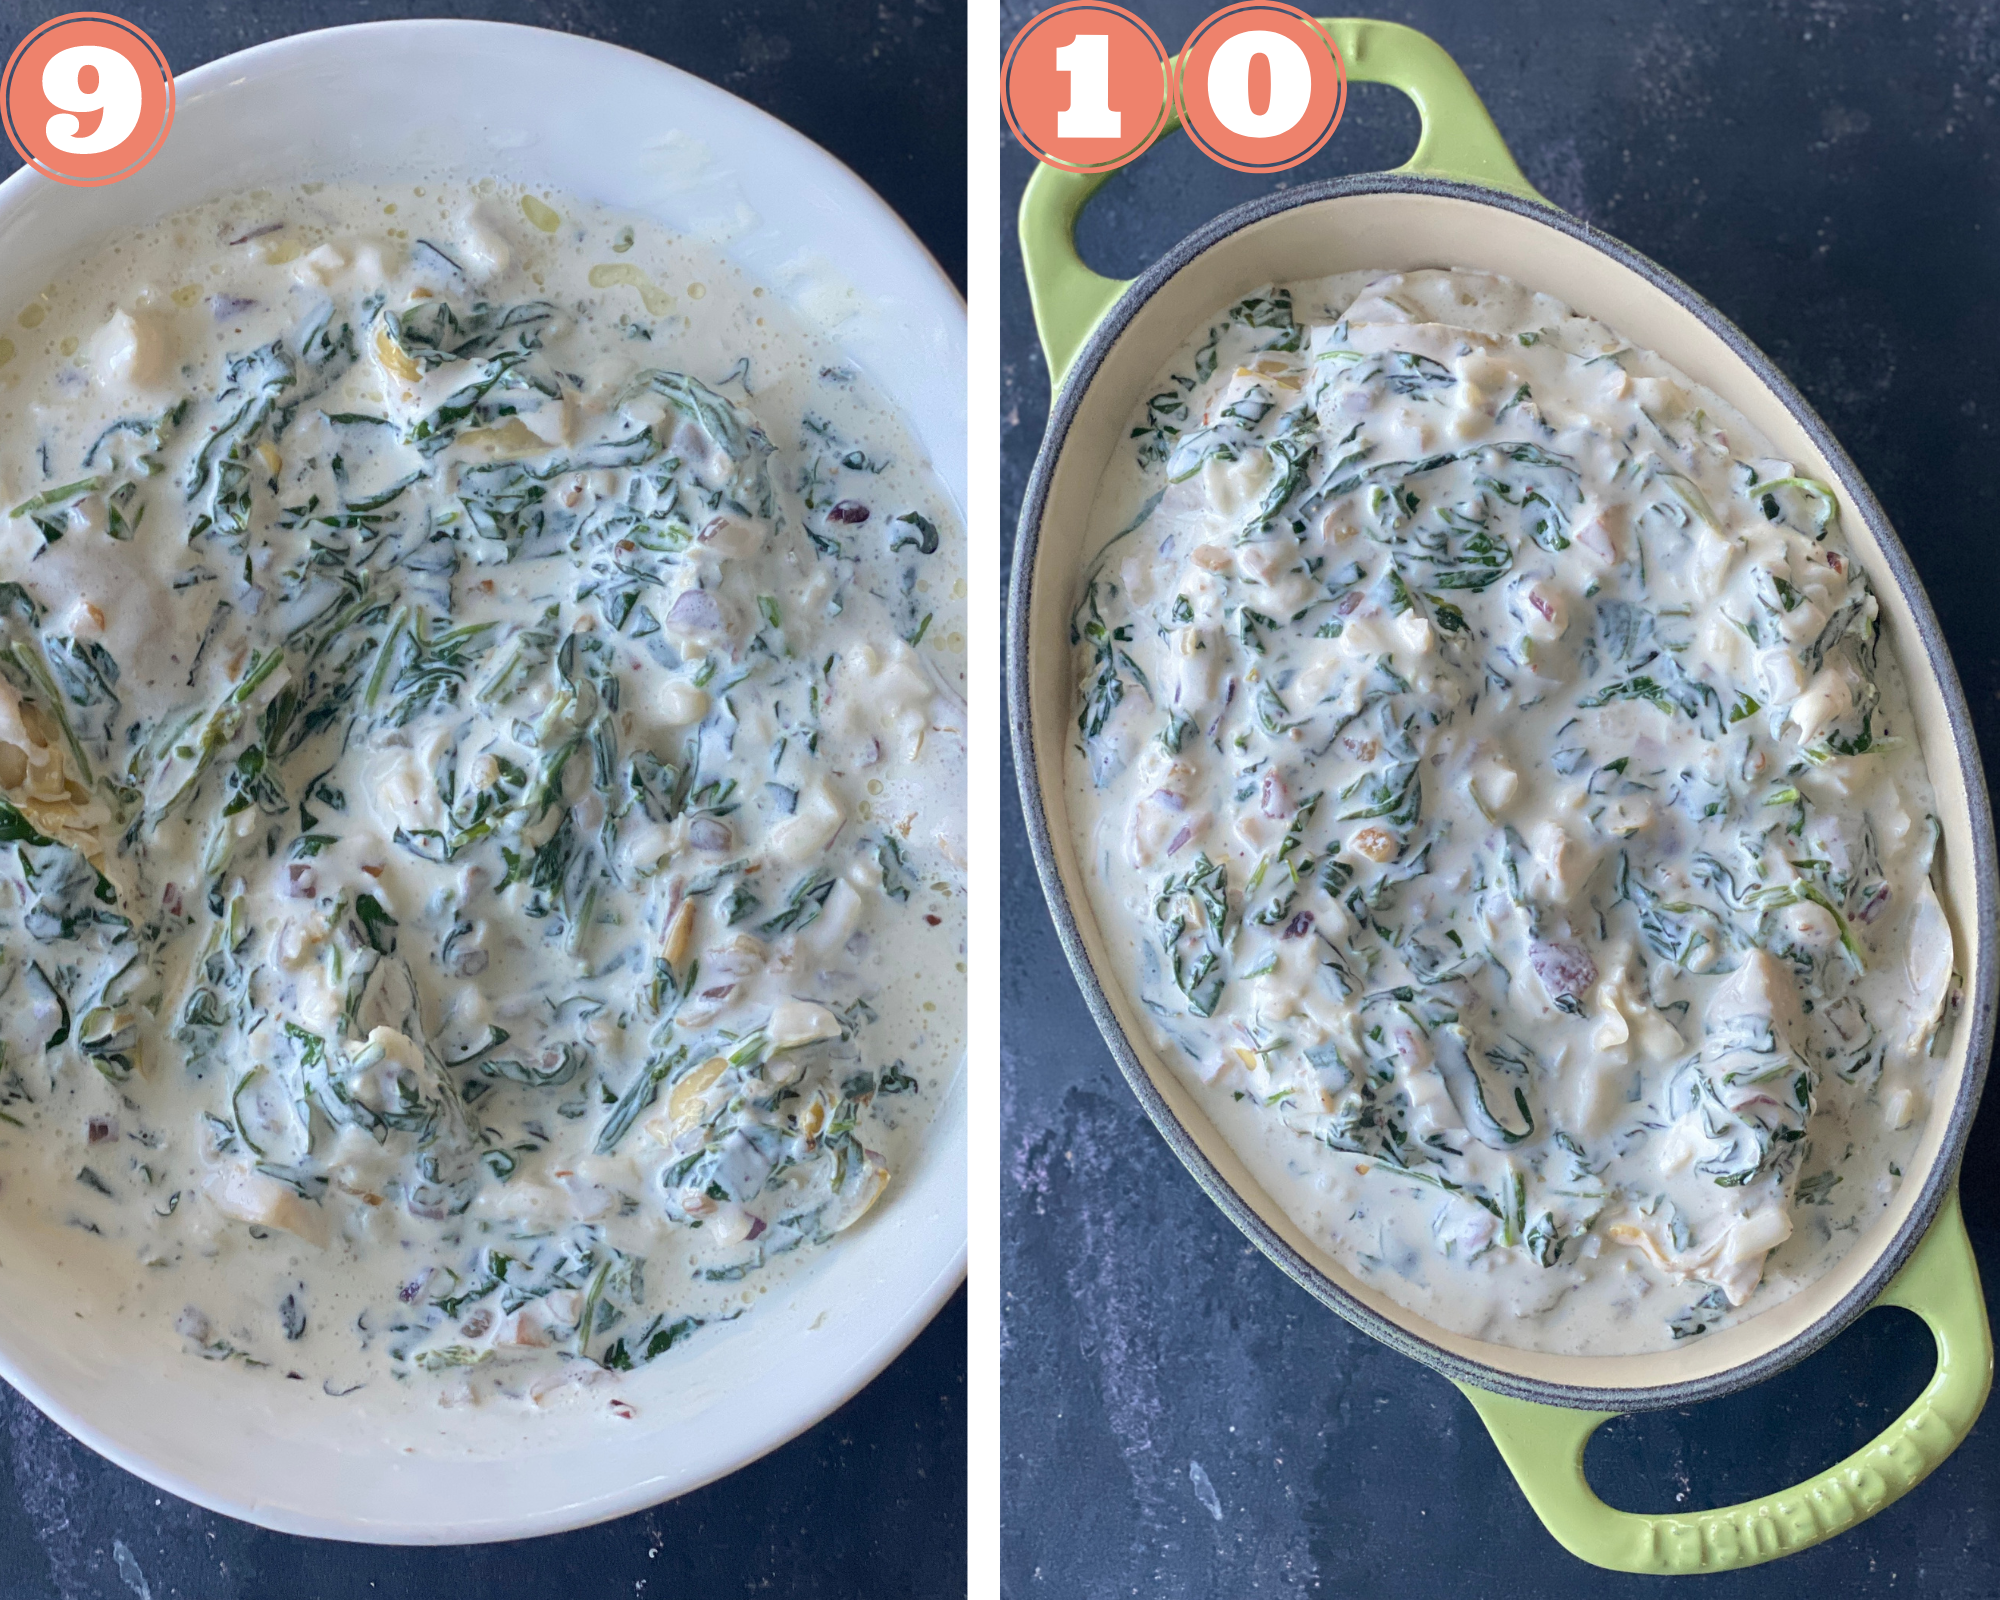 Learn the steps to make spinach artichoke dip in the oven. 